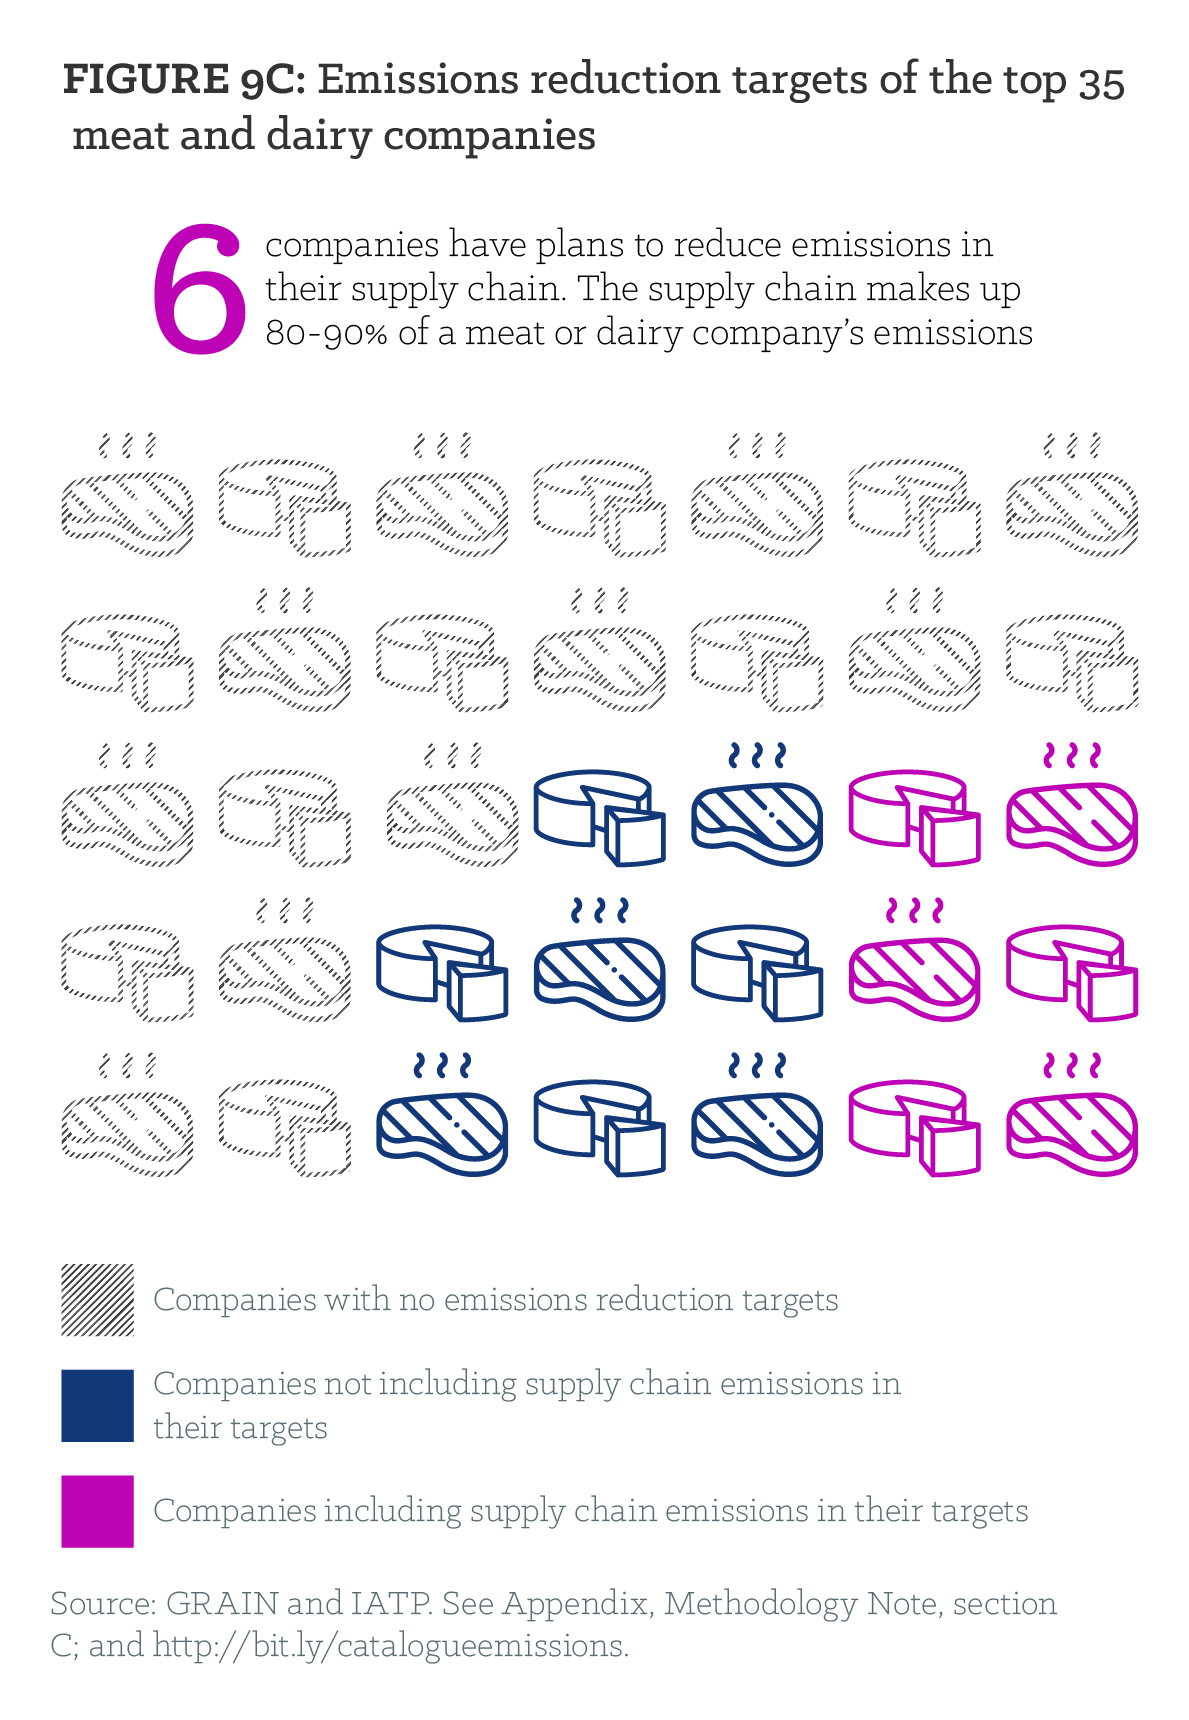 Figure 9C: Emissions reduction targets of the top 35 meat and dairy companies